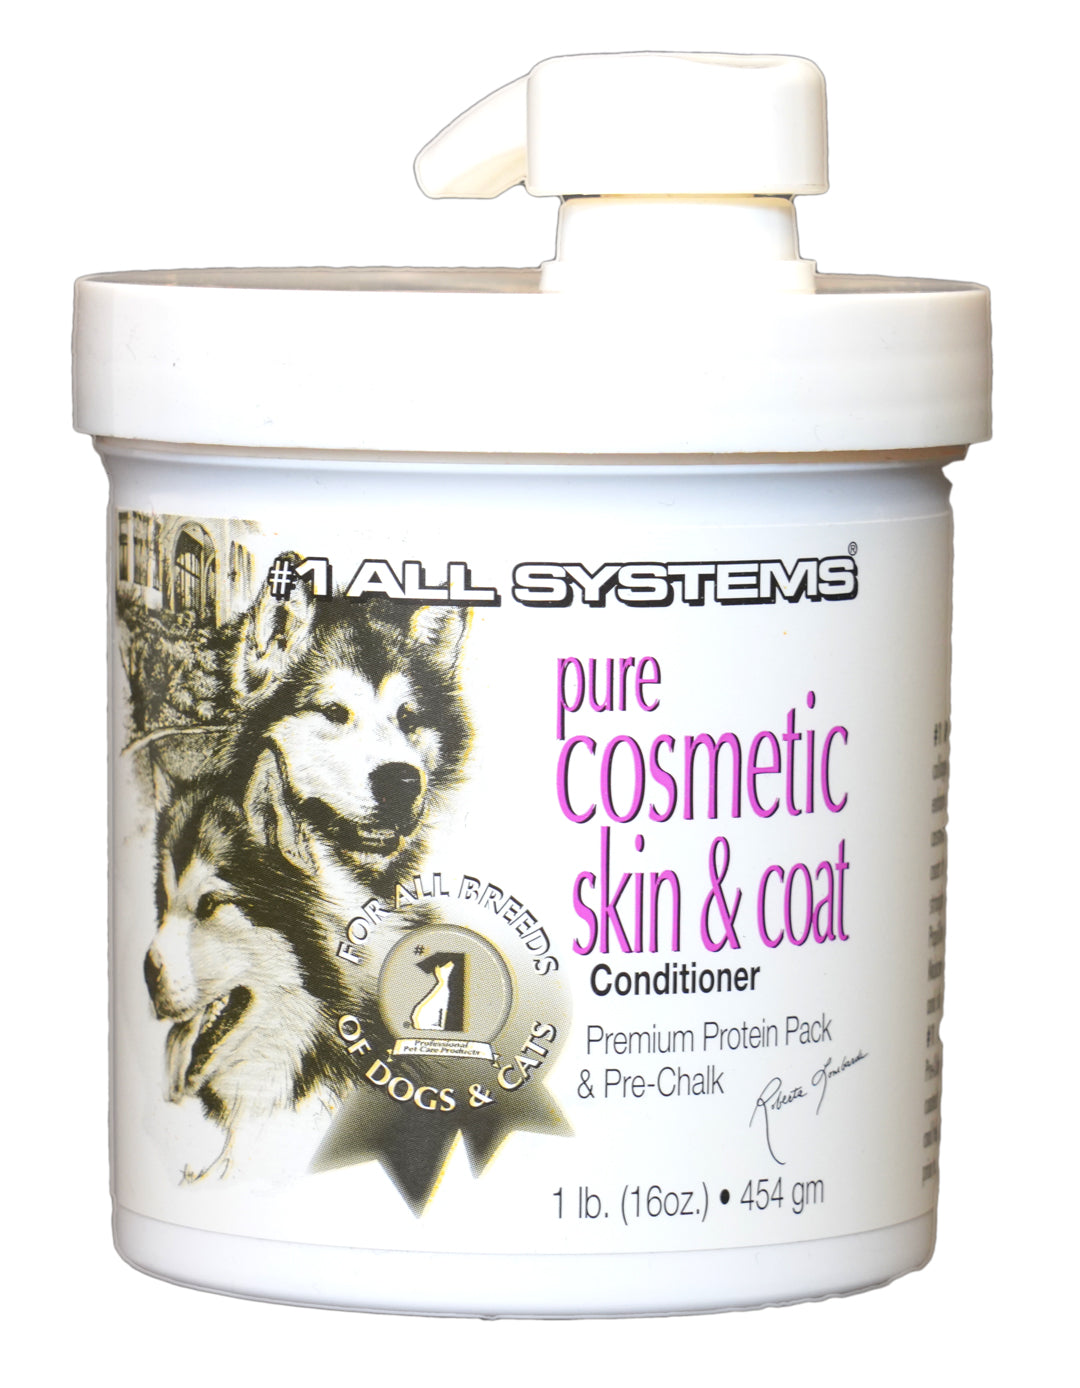 #1 All Systems Pure Cosmetic Skin & Coat Conditioner - 454g